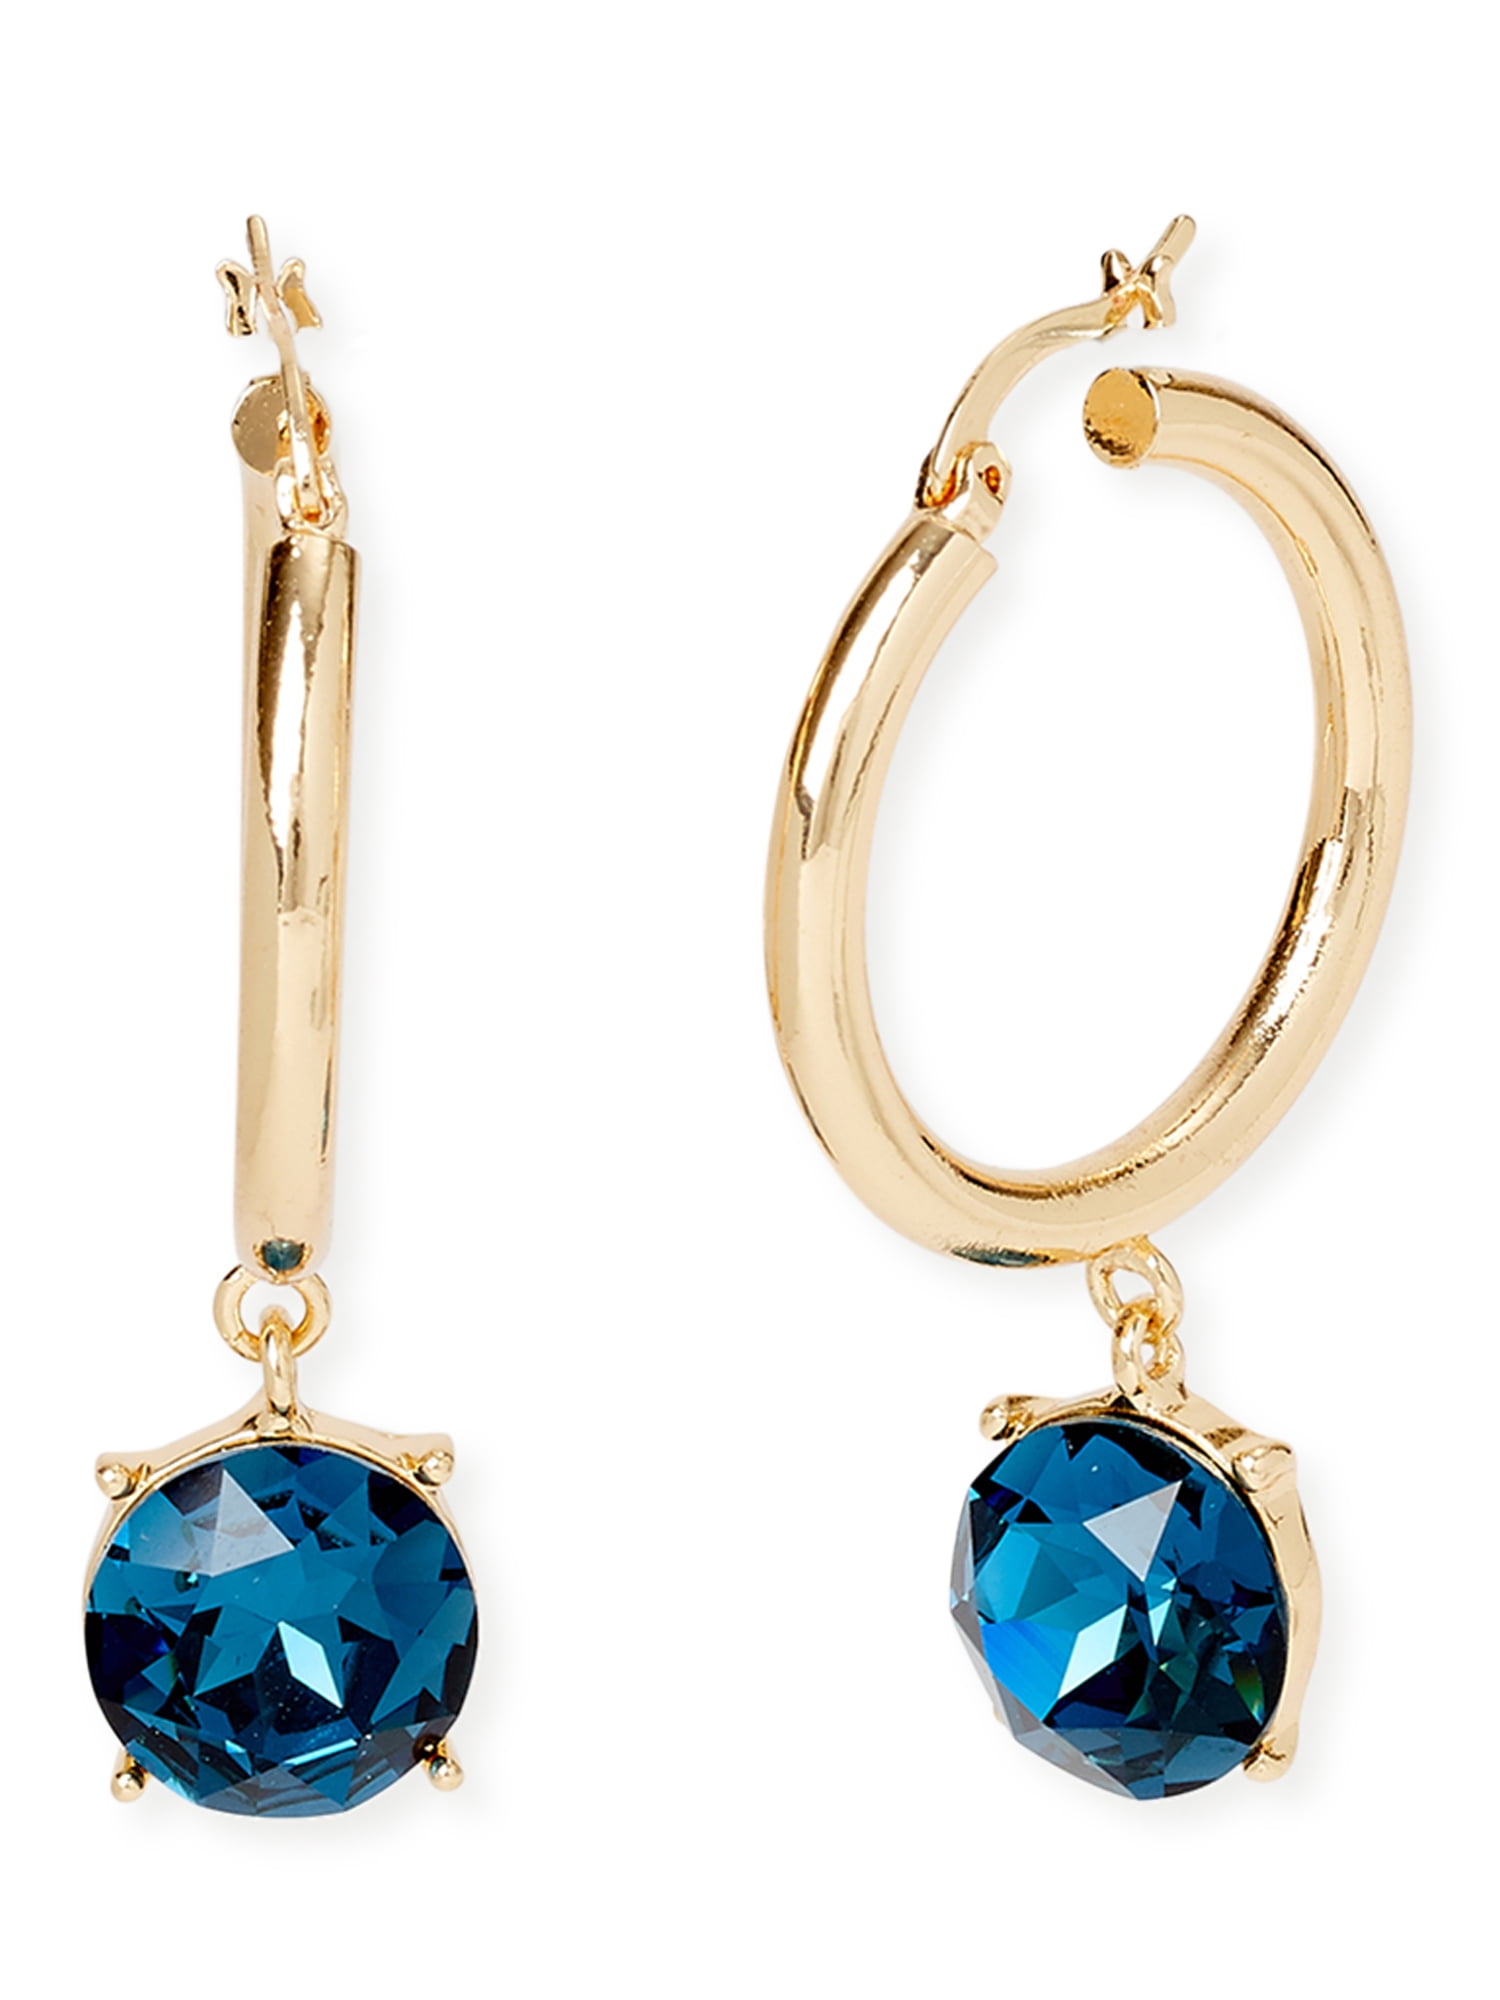 Details about   Gold Finish Blue Crystal Beads with Blue Enamel Ball Dangling Earring 